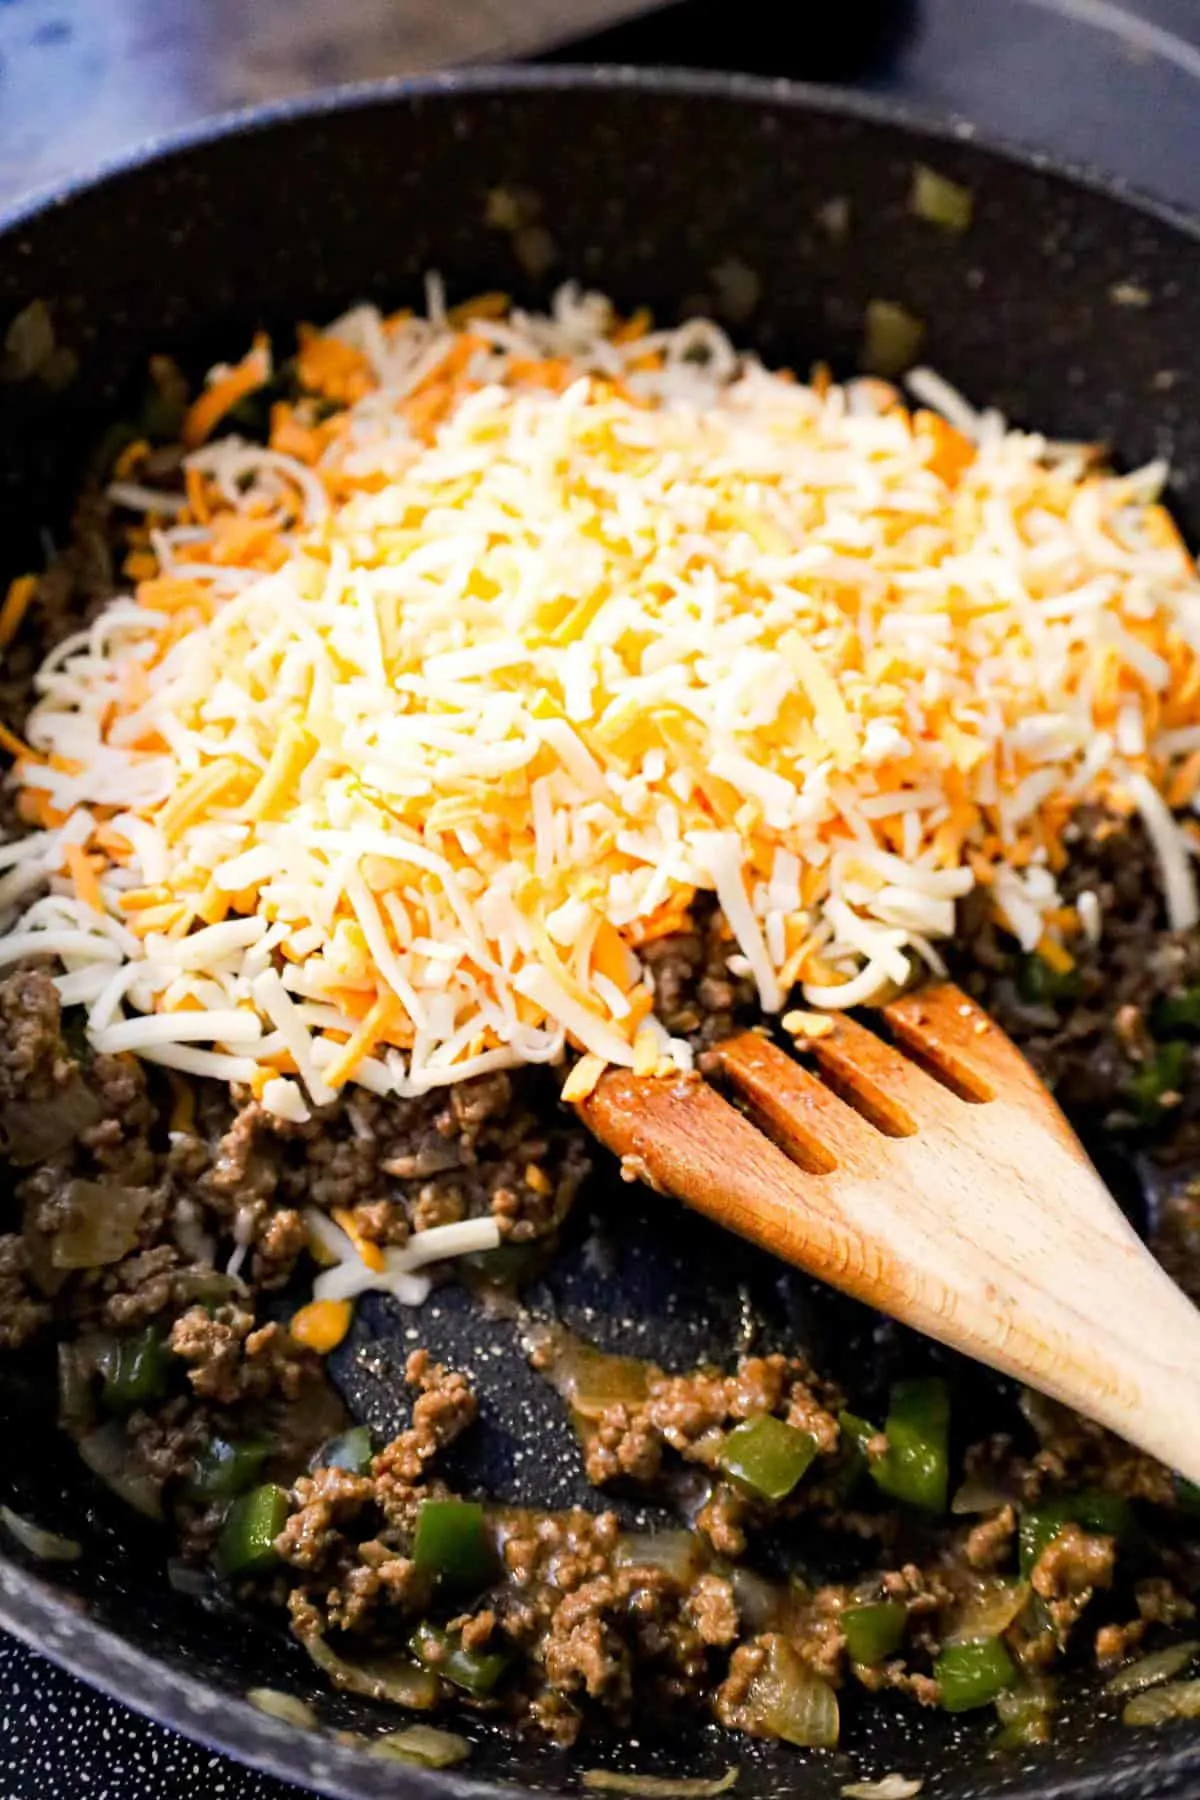 shredded mozzarella and cheddar cheese on top of ground beef mixture in a saute pan